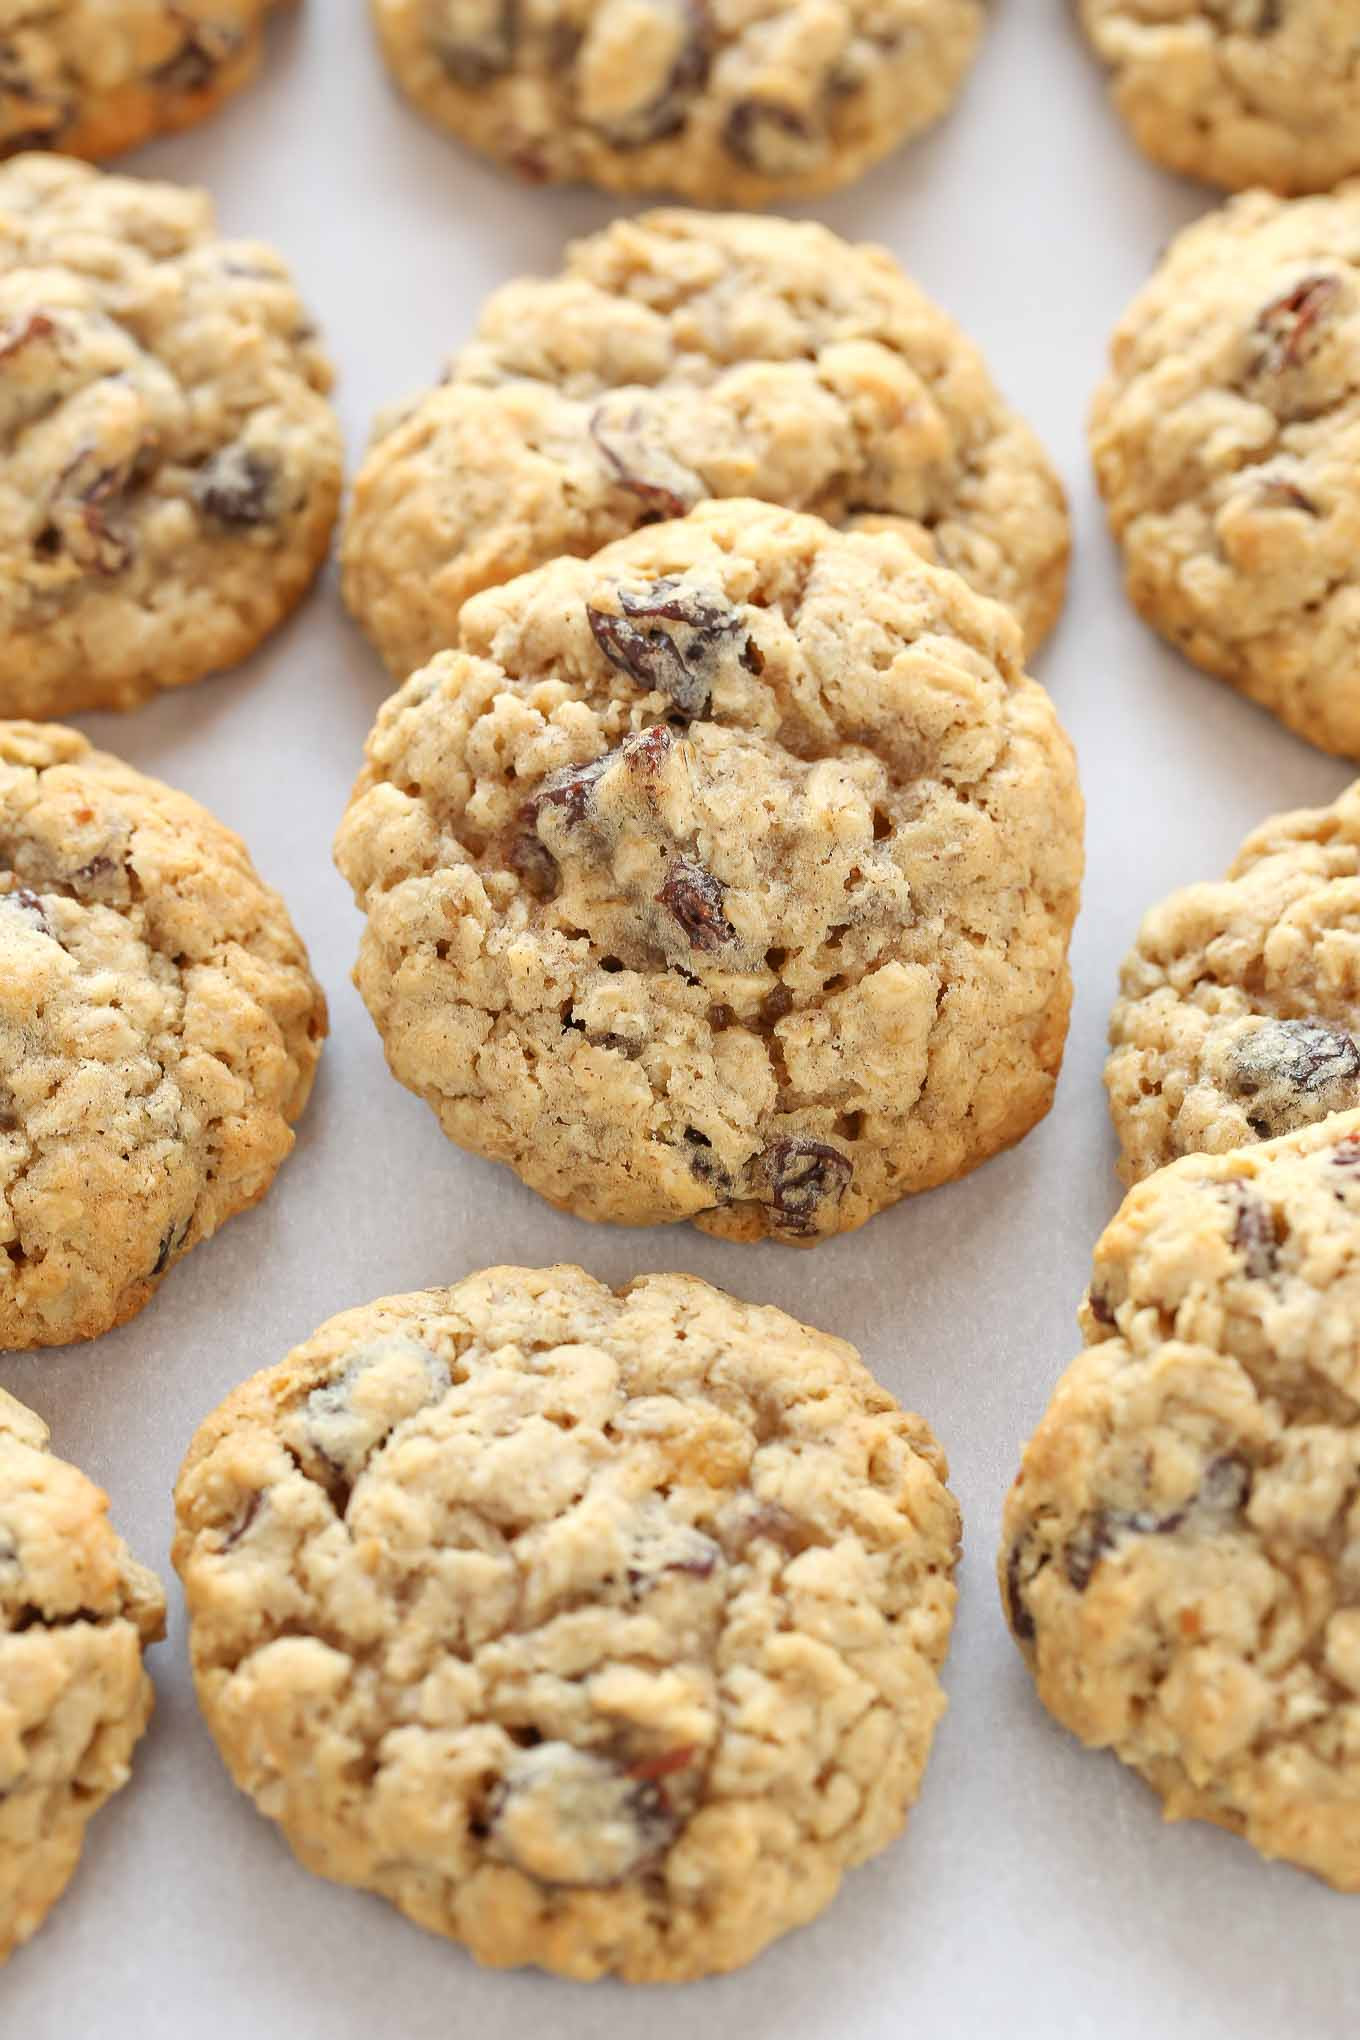 Recipes For Oatmeal Cookies
 Soft and Chewy Oatmeal Raisin Cookies